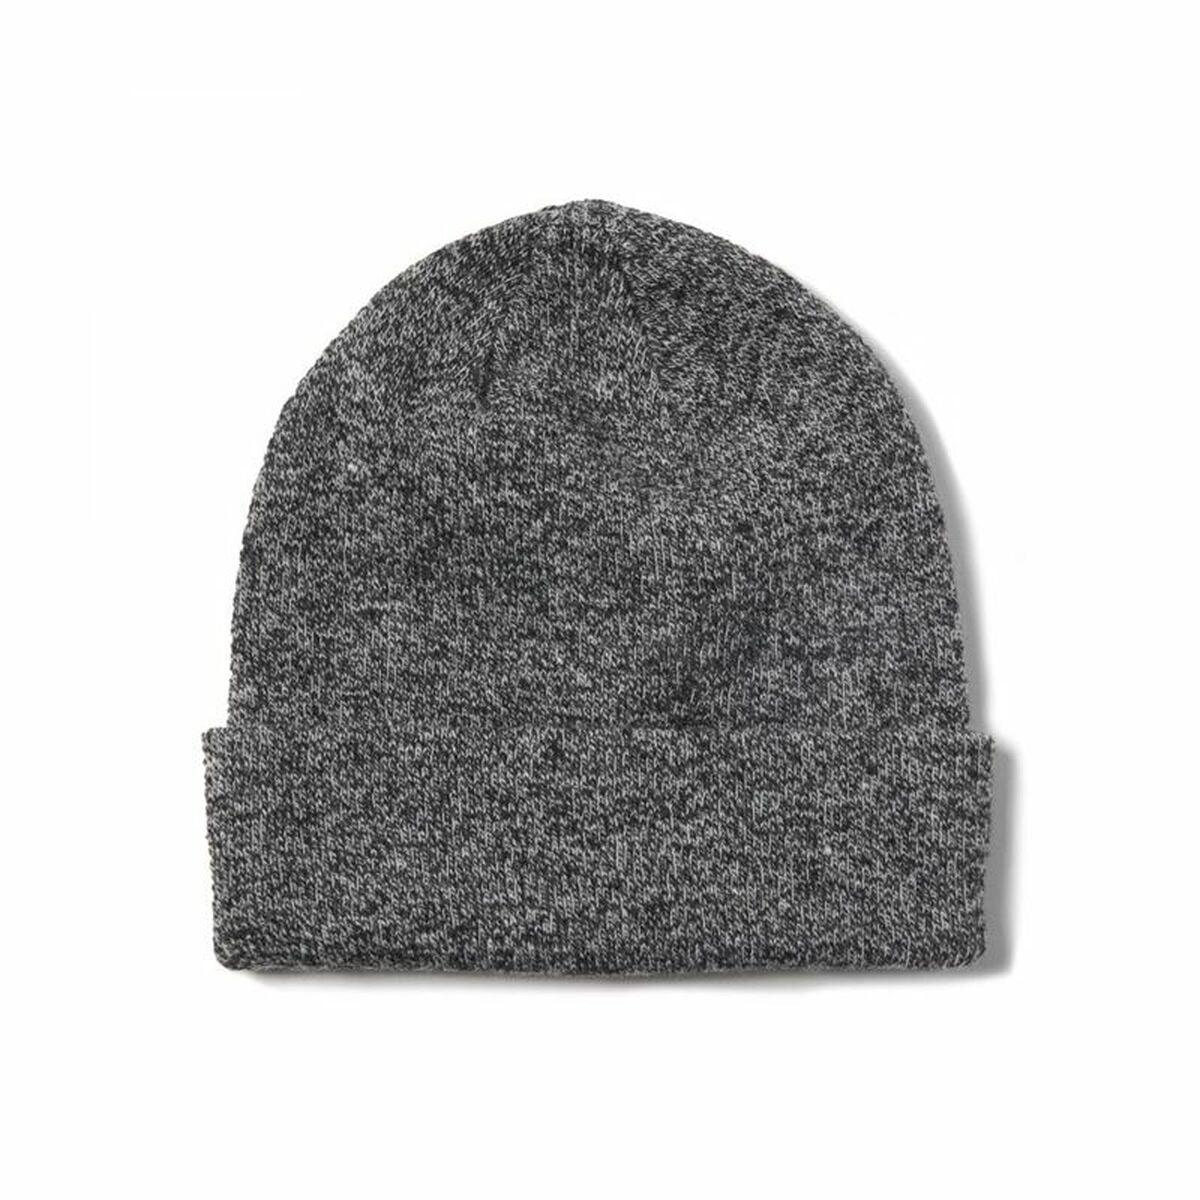 Hat Hurley Icon Cuff Beanie Grey - VirtuousWares:Global